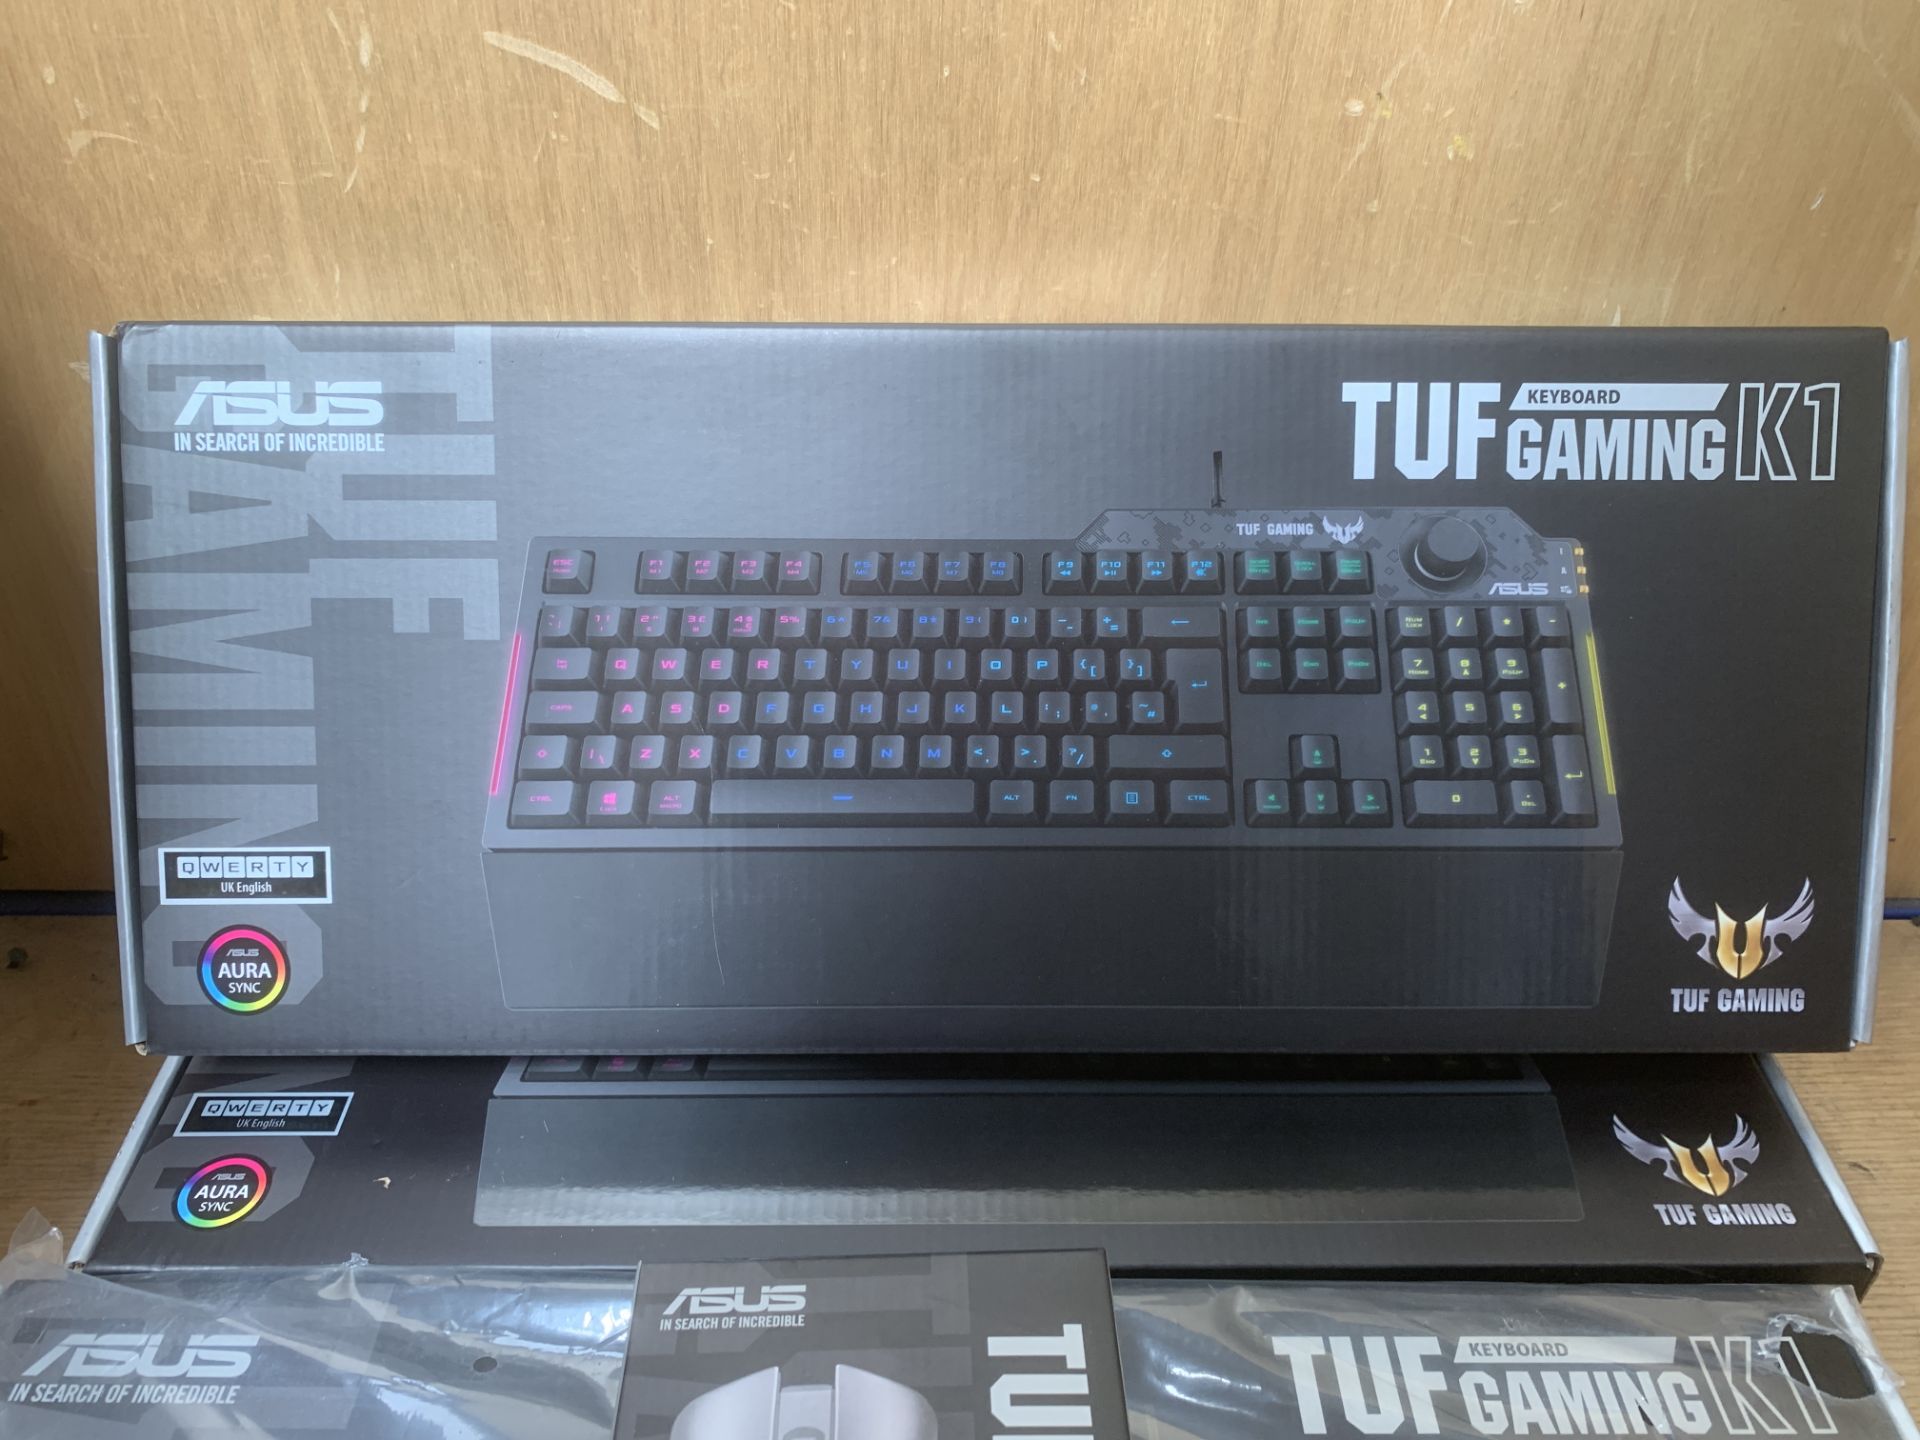 3 x Asus Tuff Gaming Mice, Mouse mats and Keyboards - boxed - Image 2 of 4